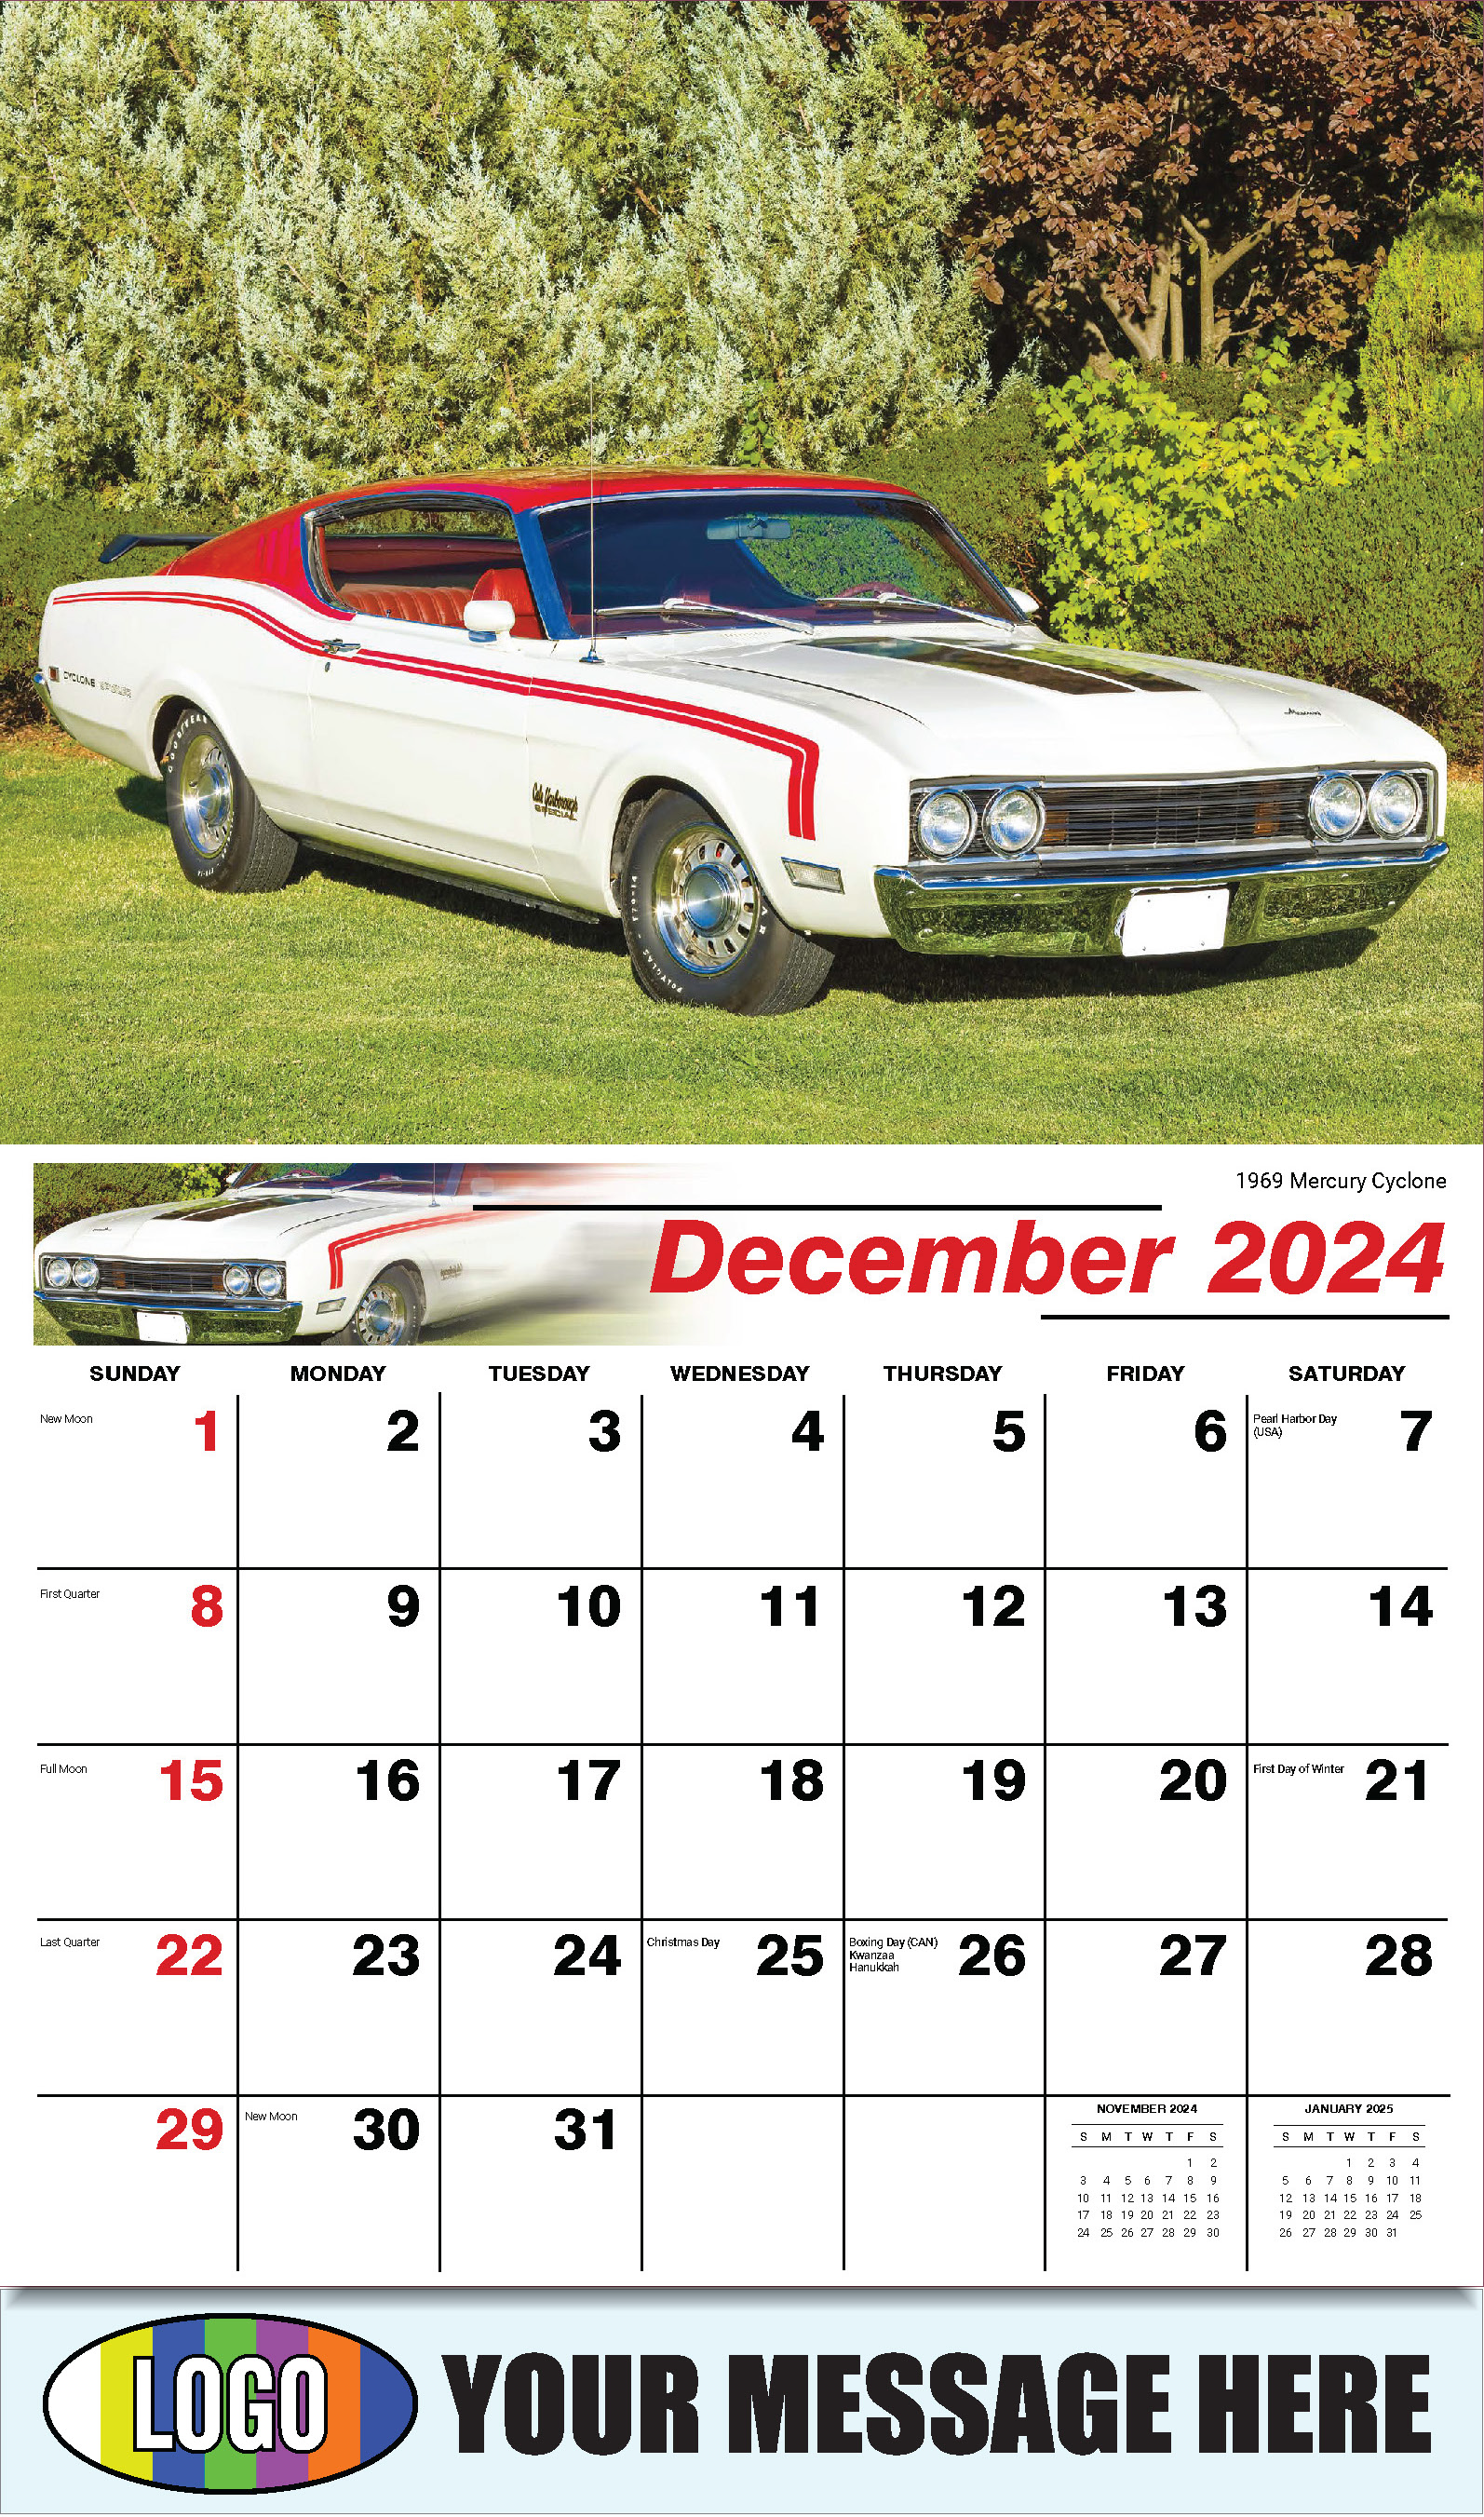 Henry's Heritage FORD Cars 2025 Automotive Business Promo Calendar - December_a